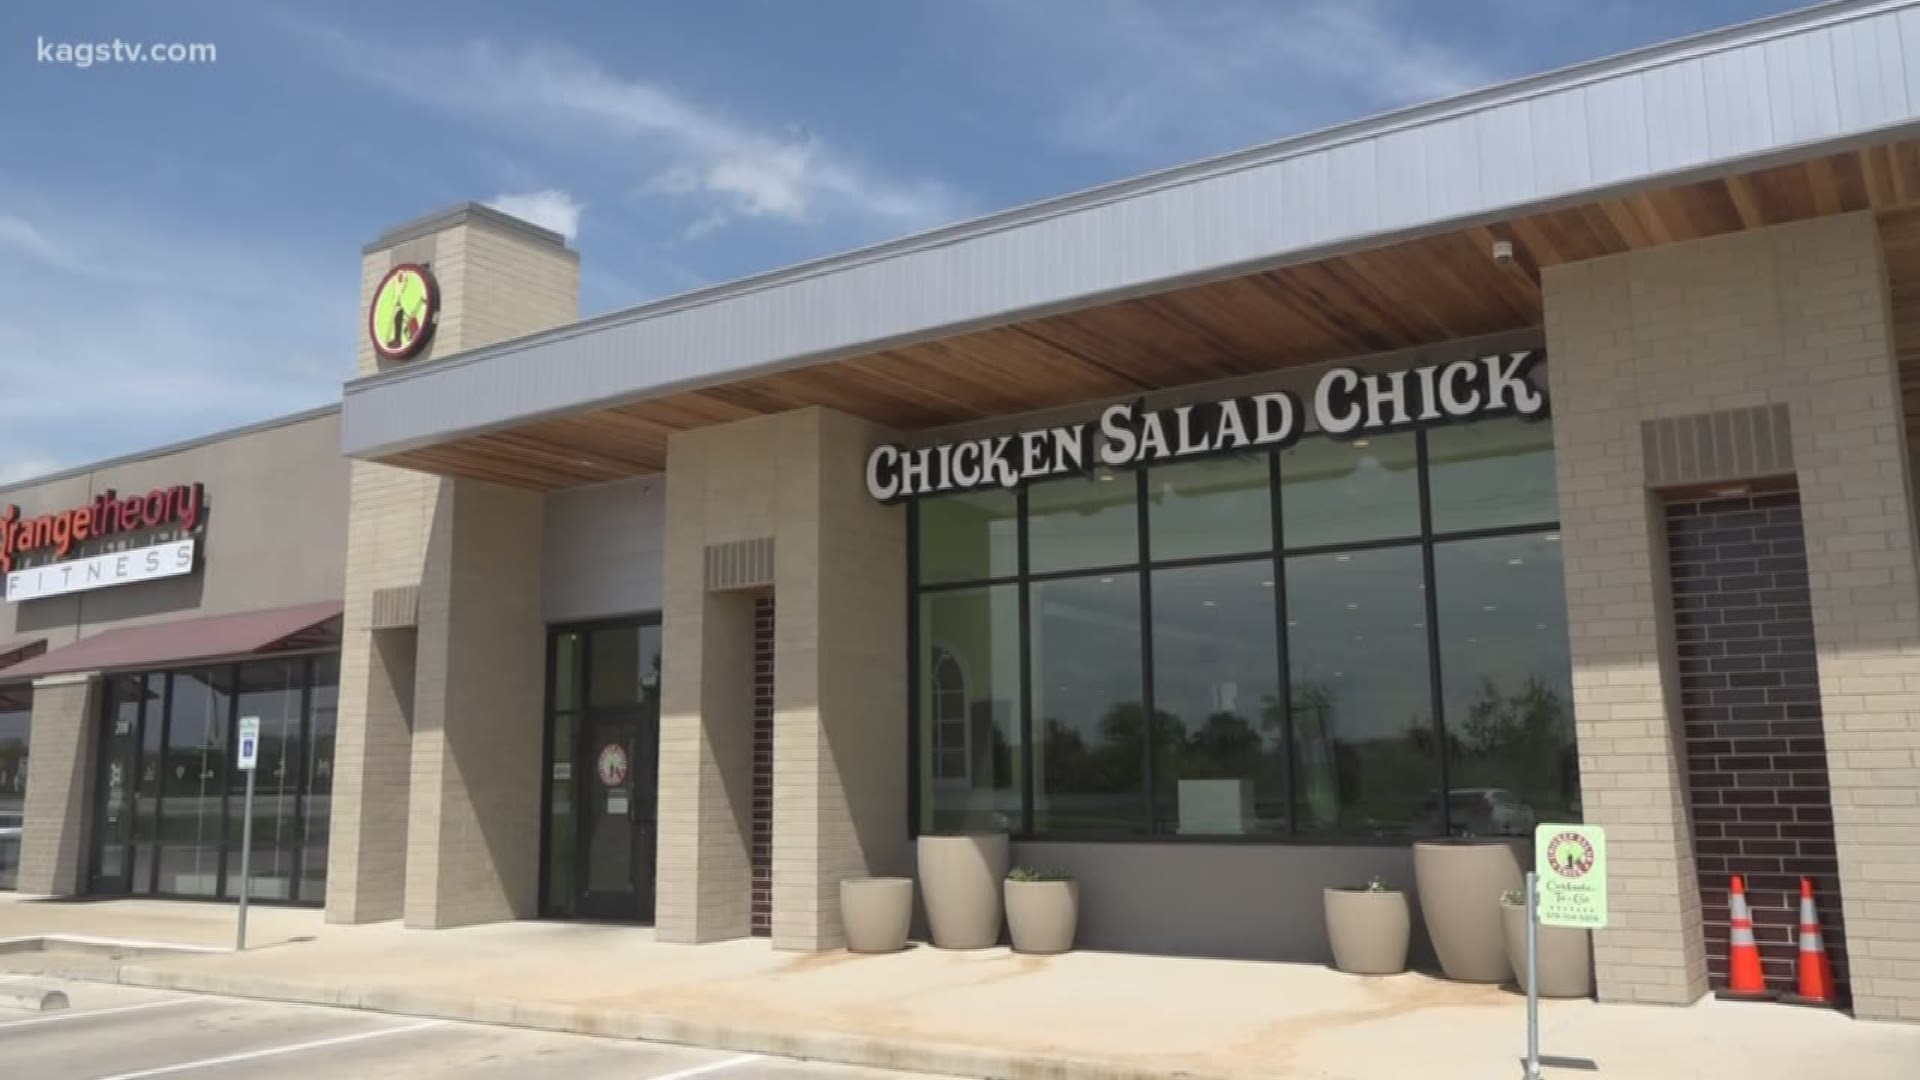 Chicken Salad Chick opened in College Station June 2019. The coronavirus pandemic is causing business to move slower than usual.